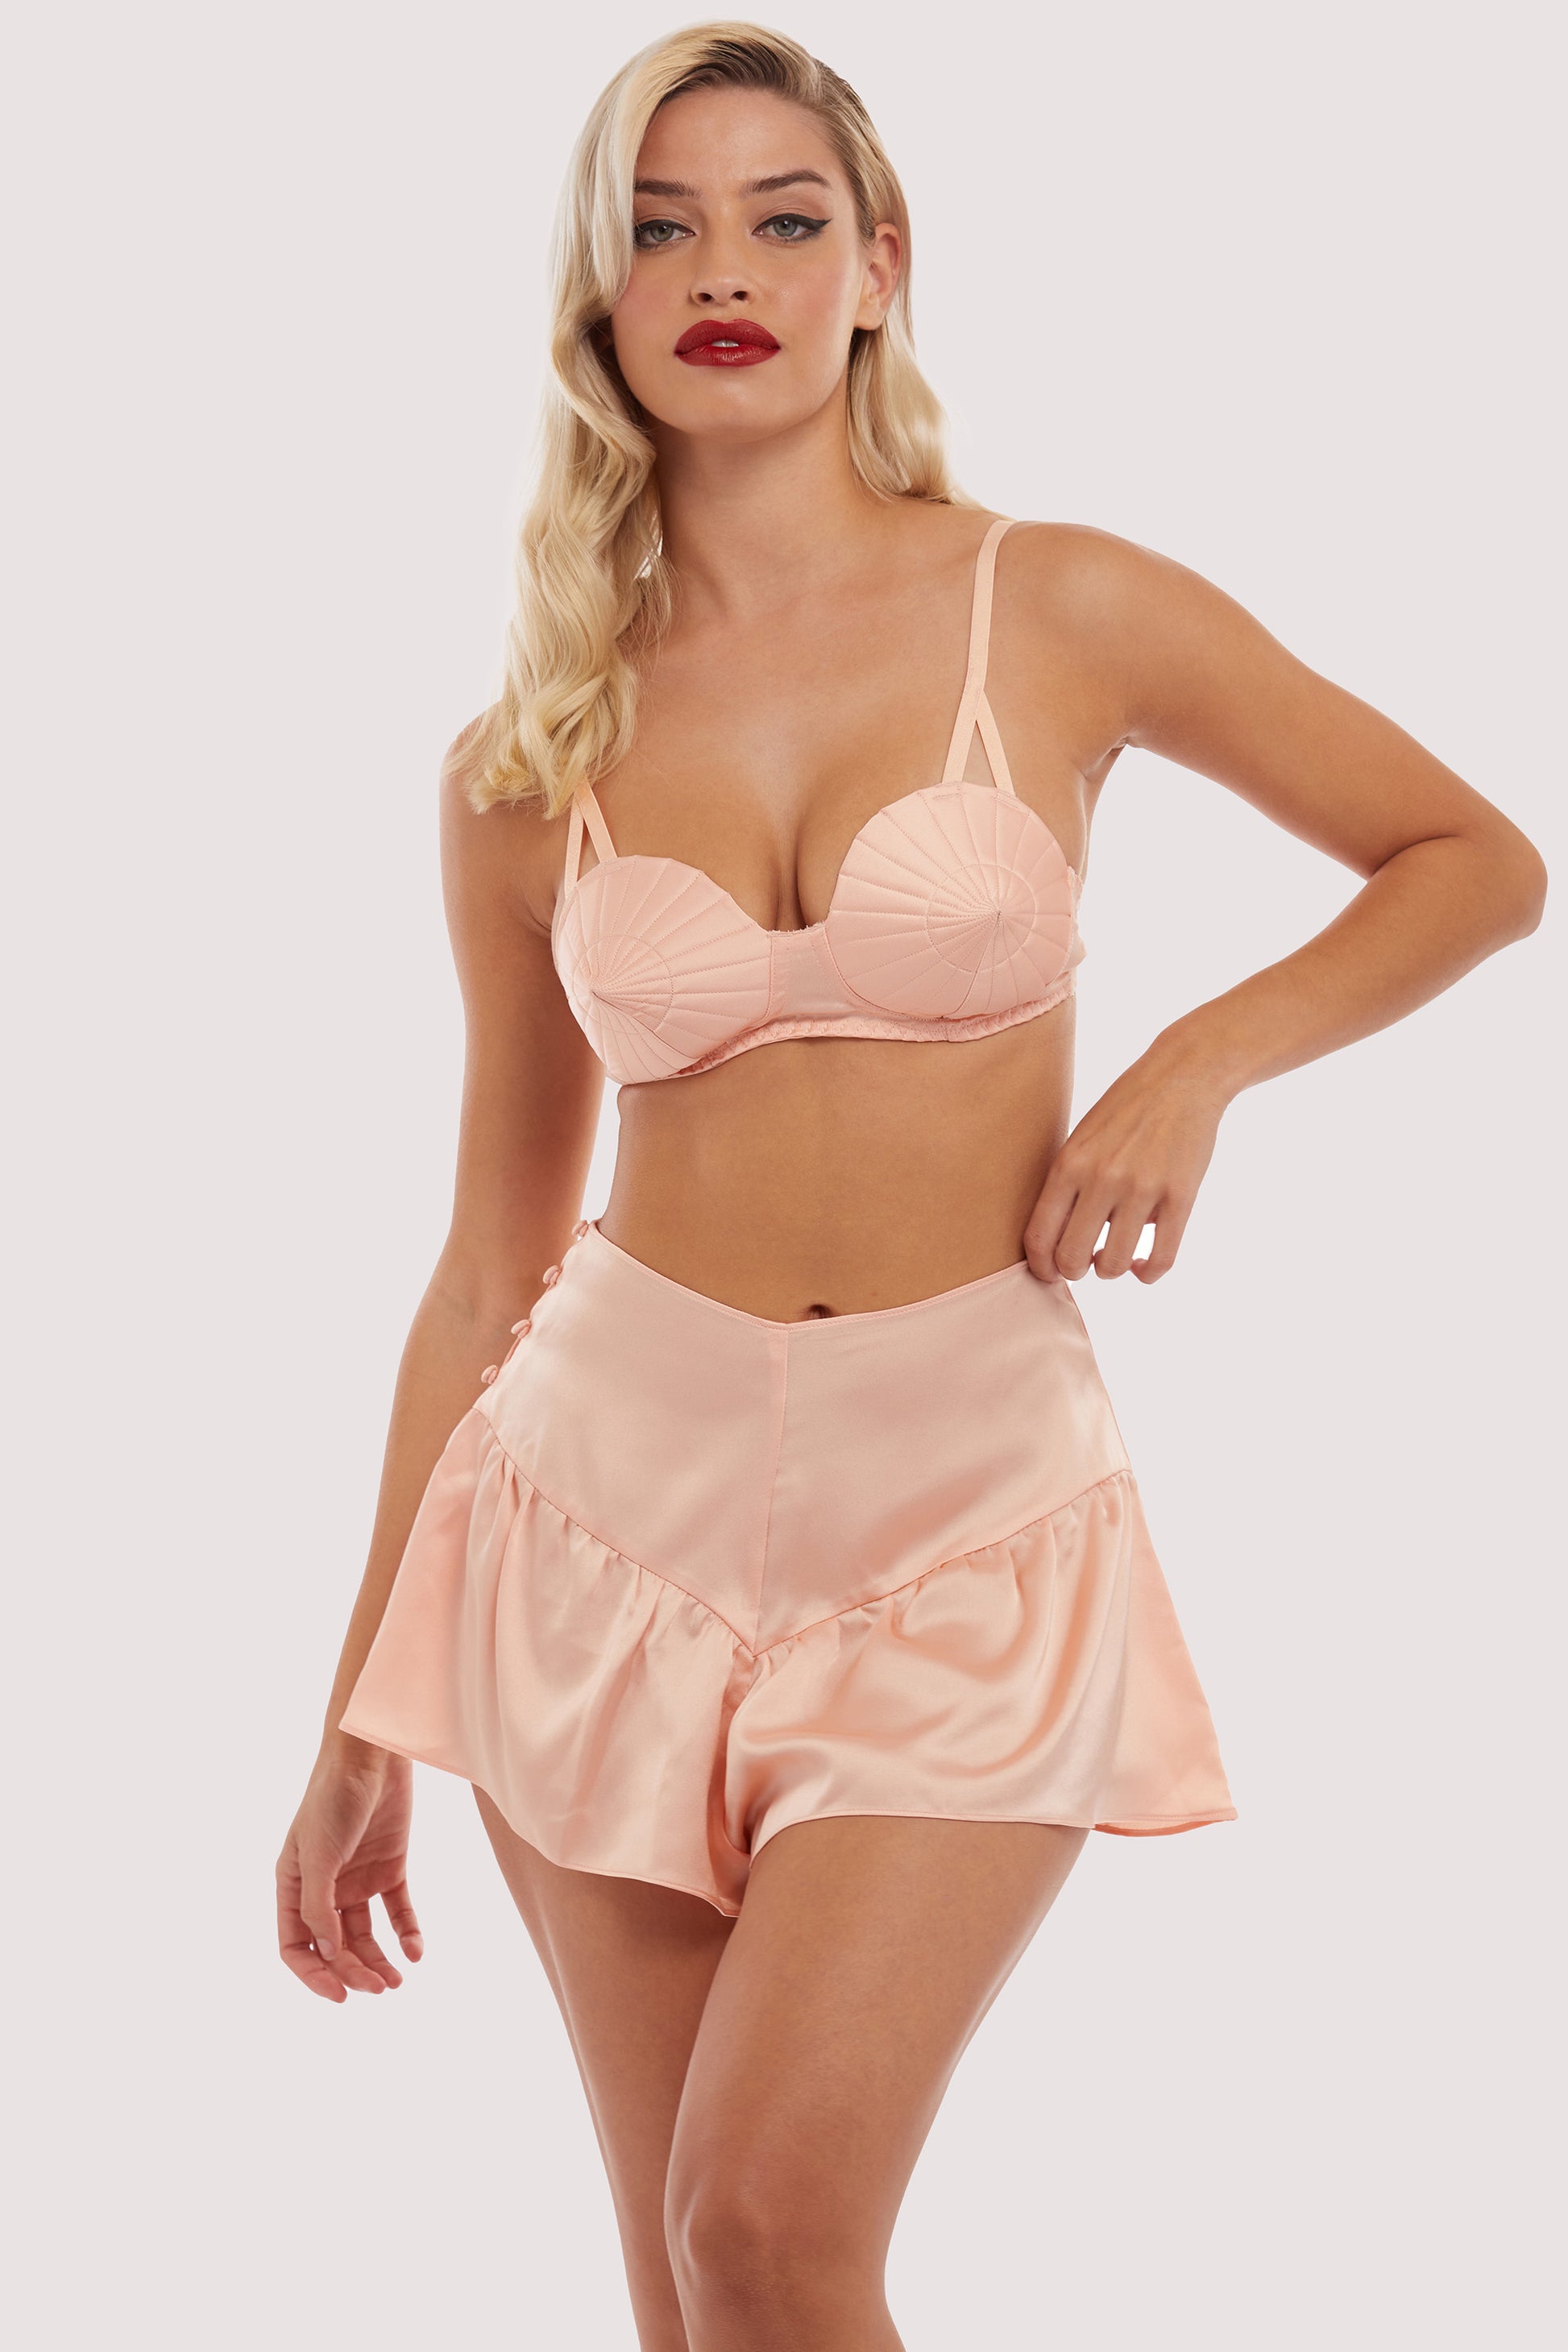 Bettie Page Peach Pink Heart Lace French Knicker - sizes 4 - 14